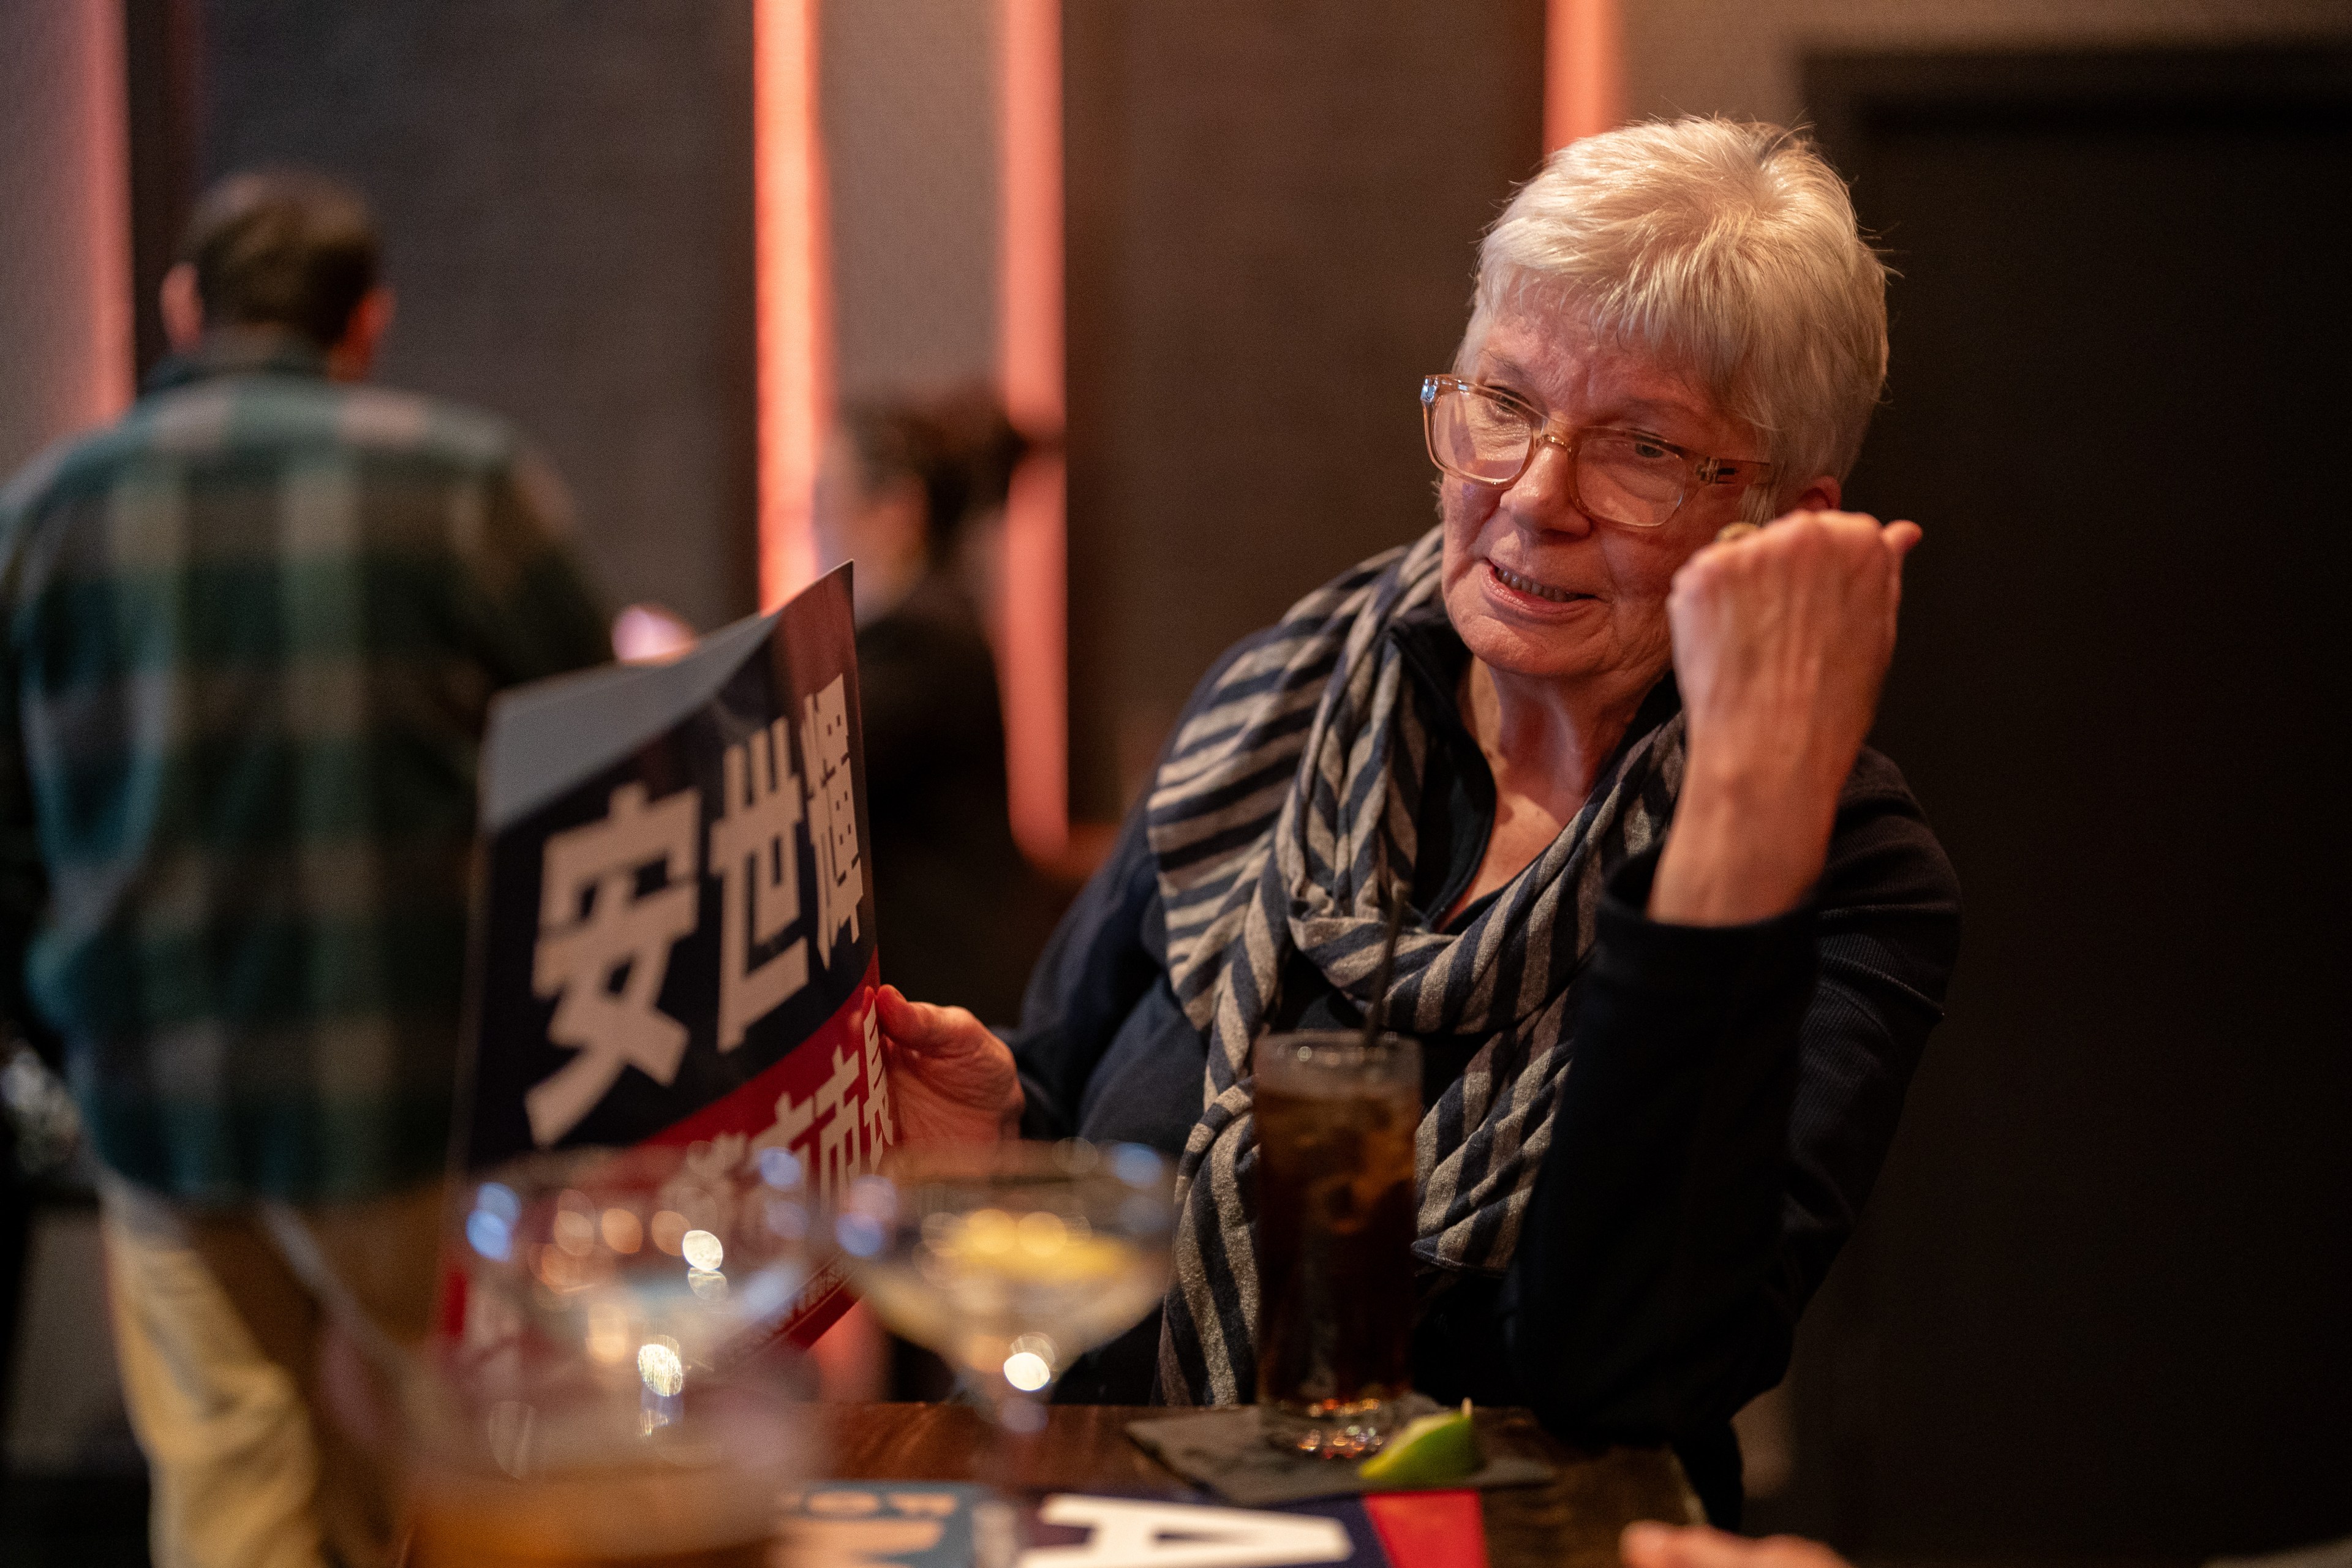 An elderly woman in a bar holds a menu with Japanese characters, smiling while interacting with someone off-camera; drinks and soft lighting in the background.